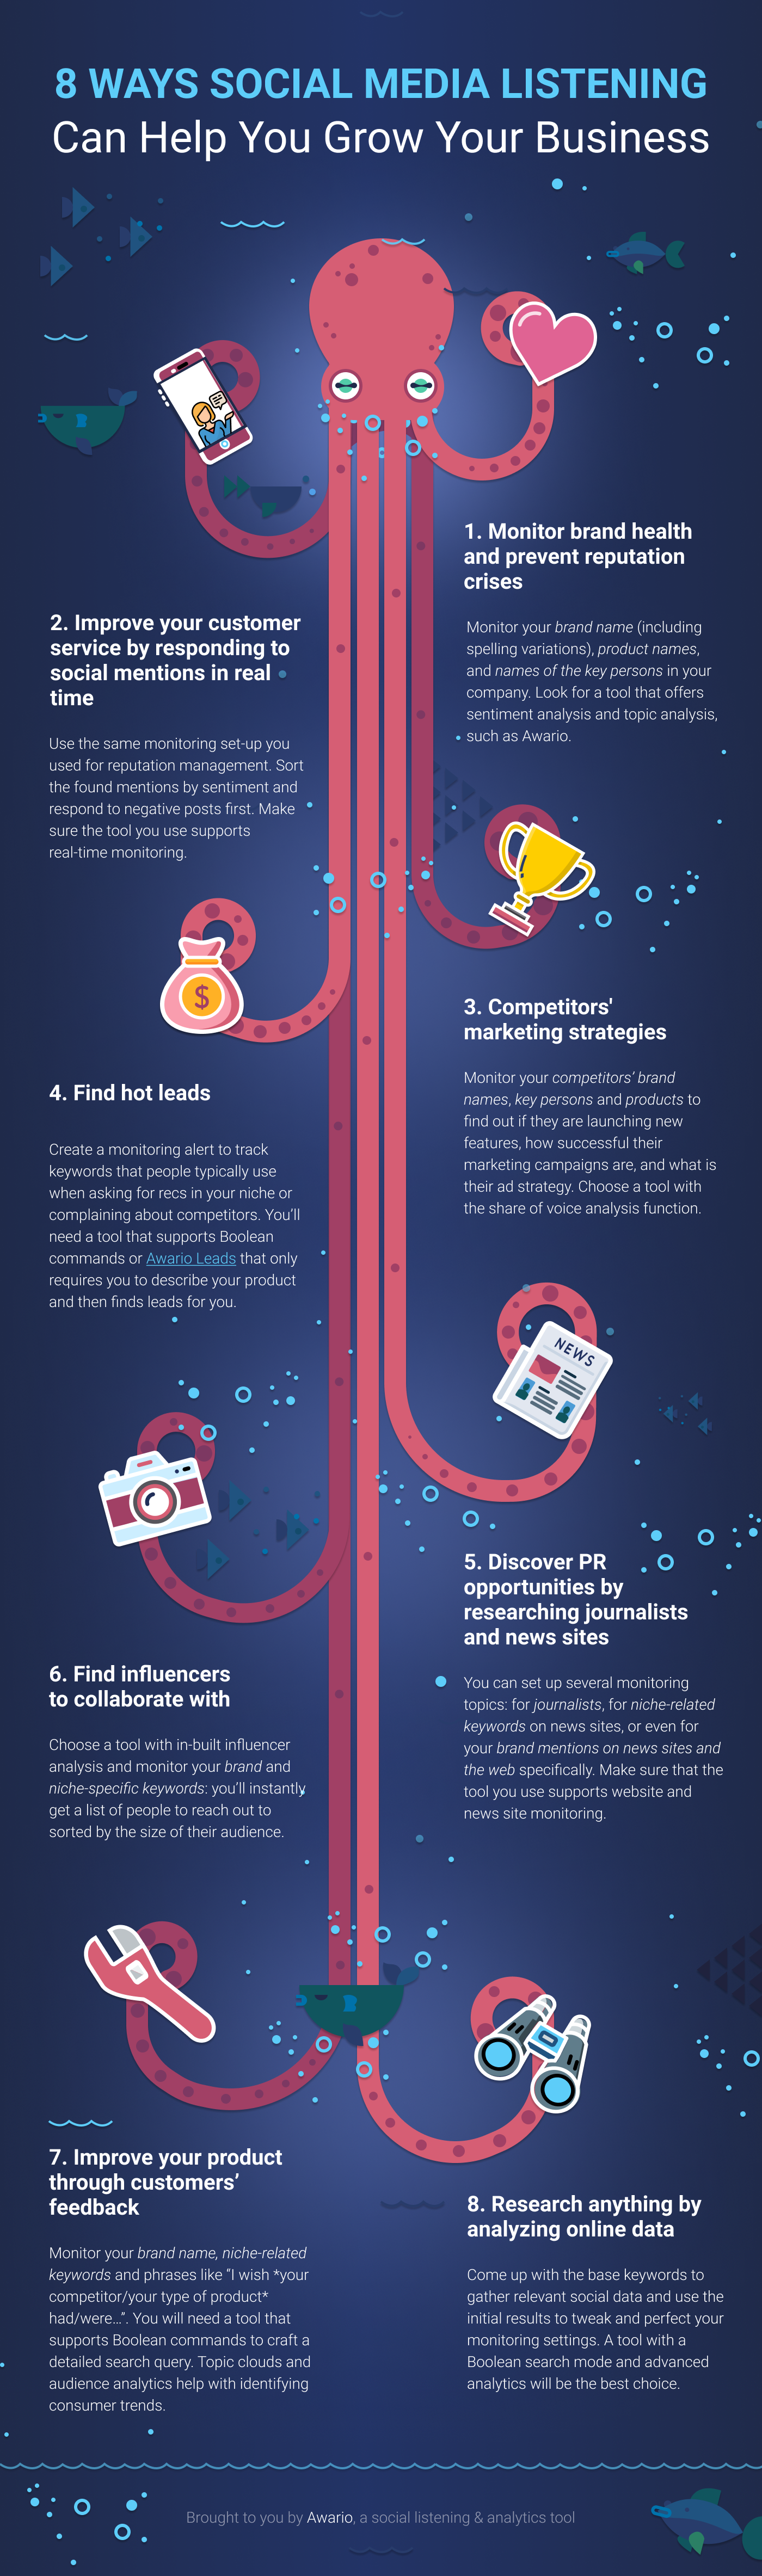 infographic social listening for business